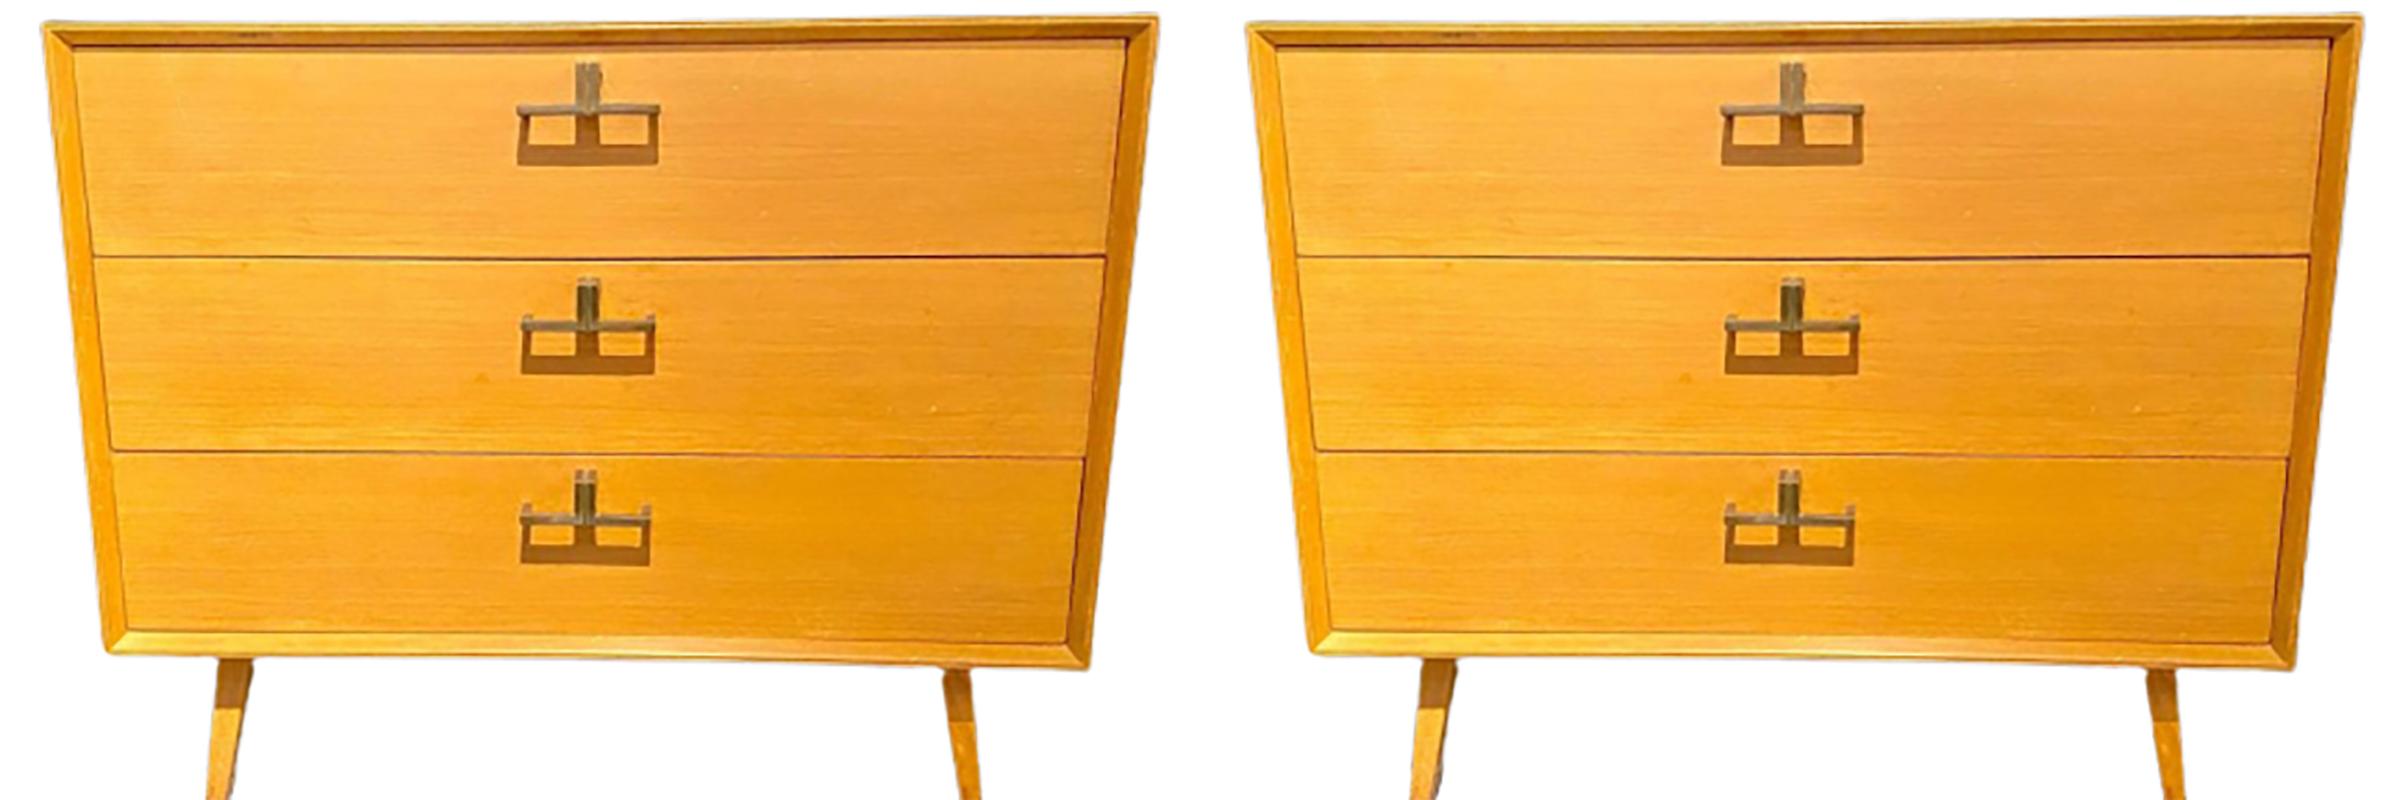 Pair of Mid-Century Modern bachelor chests, commodes, nightstands or dressers. A finely constructed pair of three-drawer commodes, all wood, with brass mounts having a sleek and simply flair. The pair with sprayed legs supporting a large case